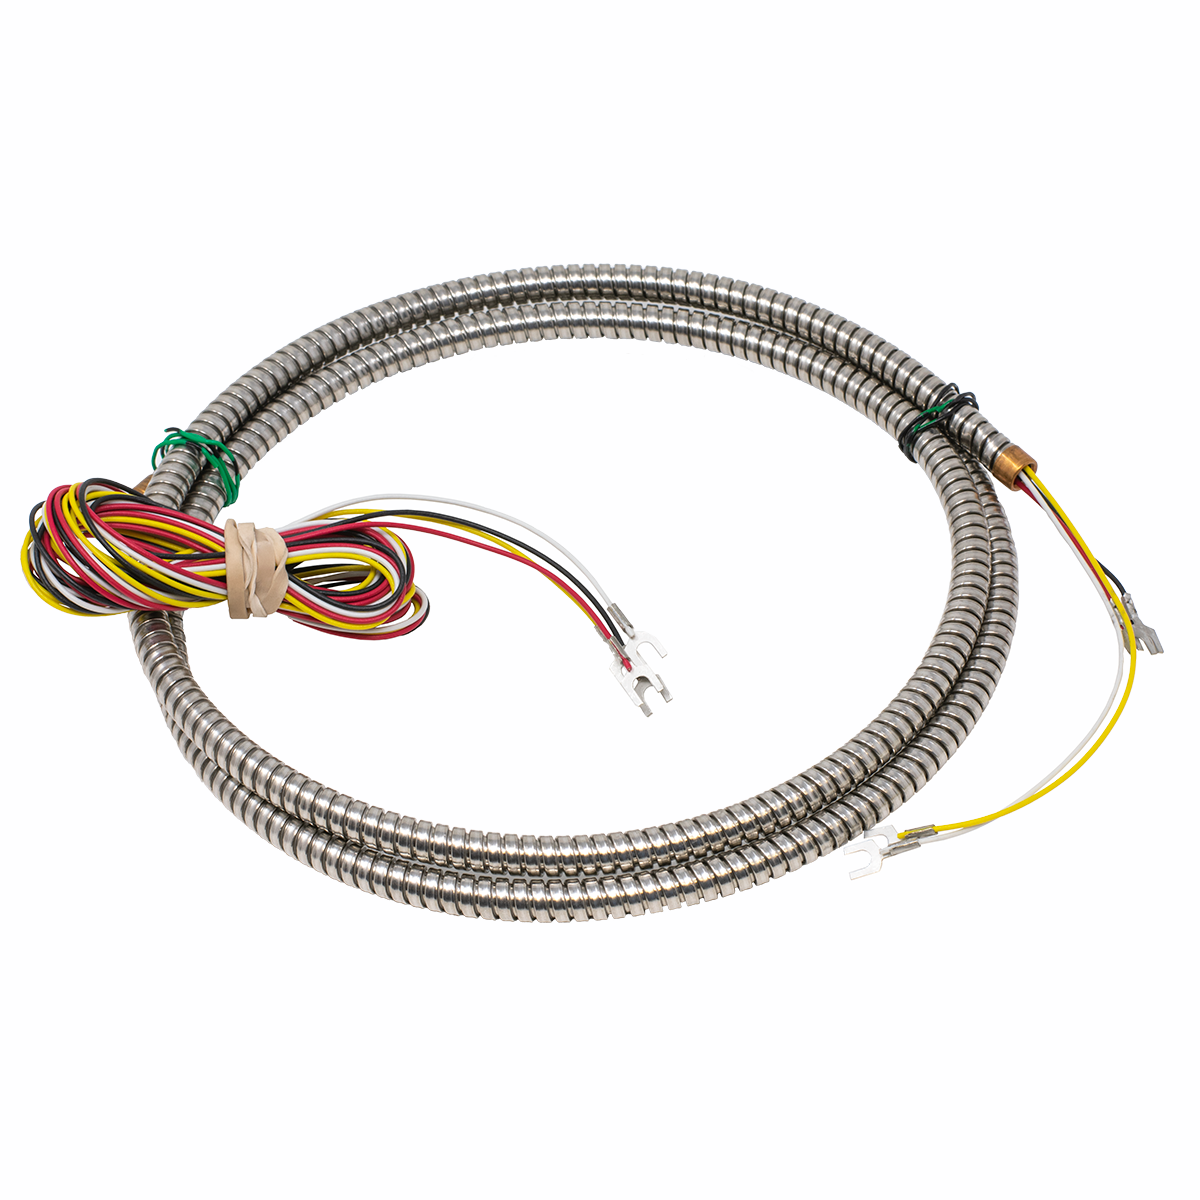 3' Armored Handset Cord 2' Wires